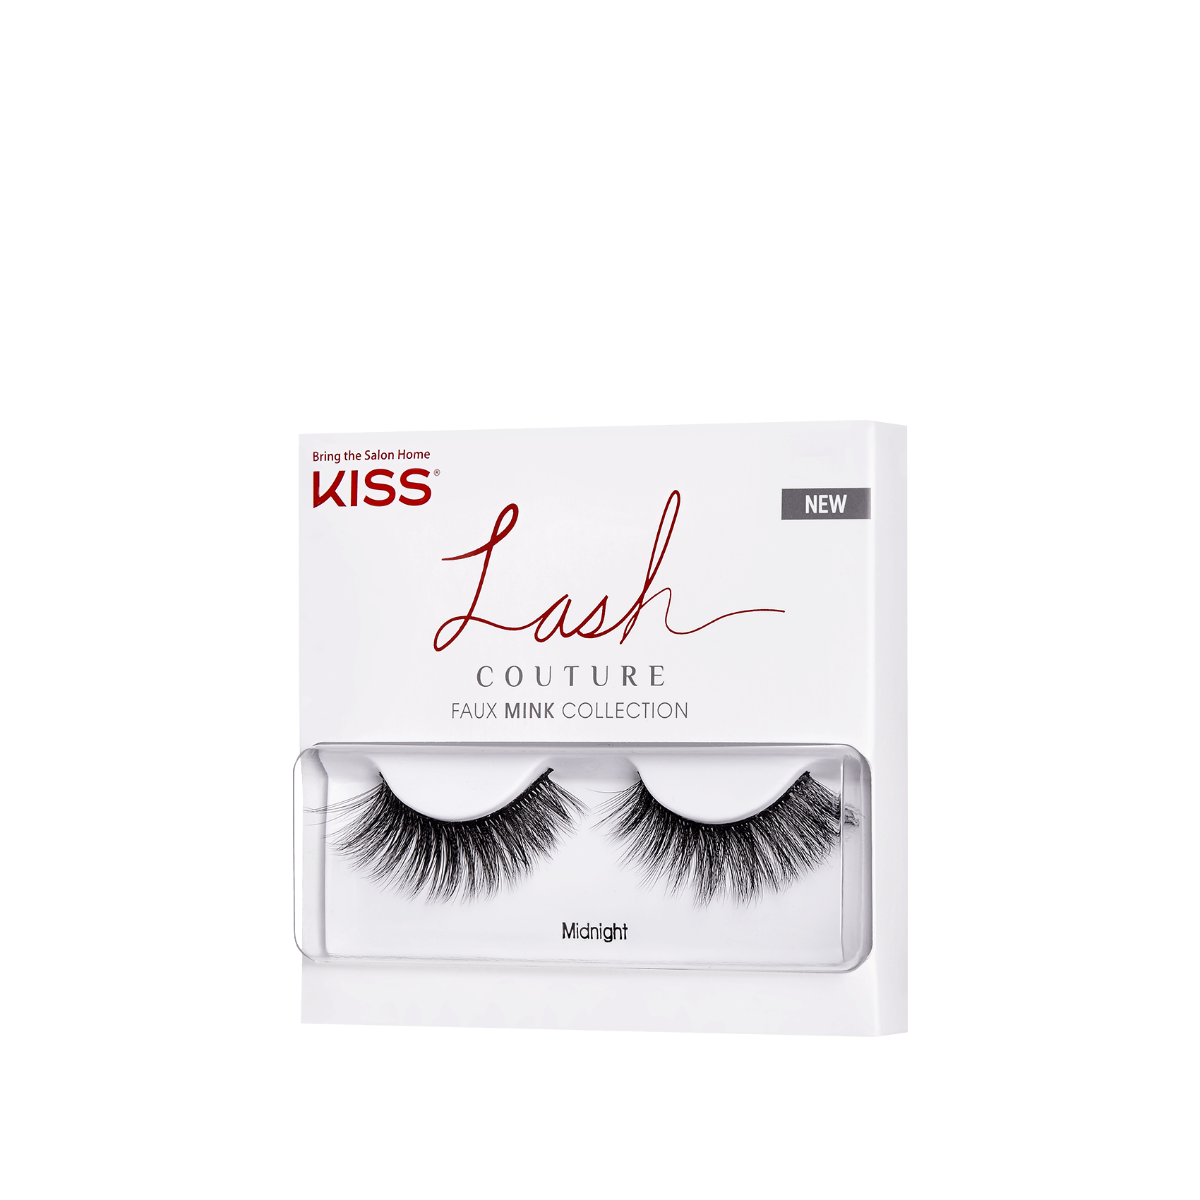 KISS Lash Couture Perfect Match - Midnight + Adhesive